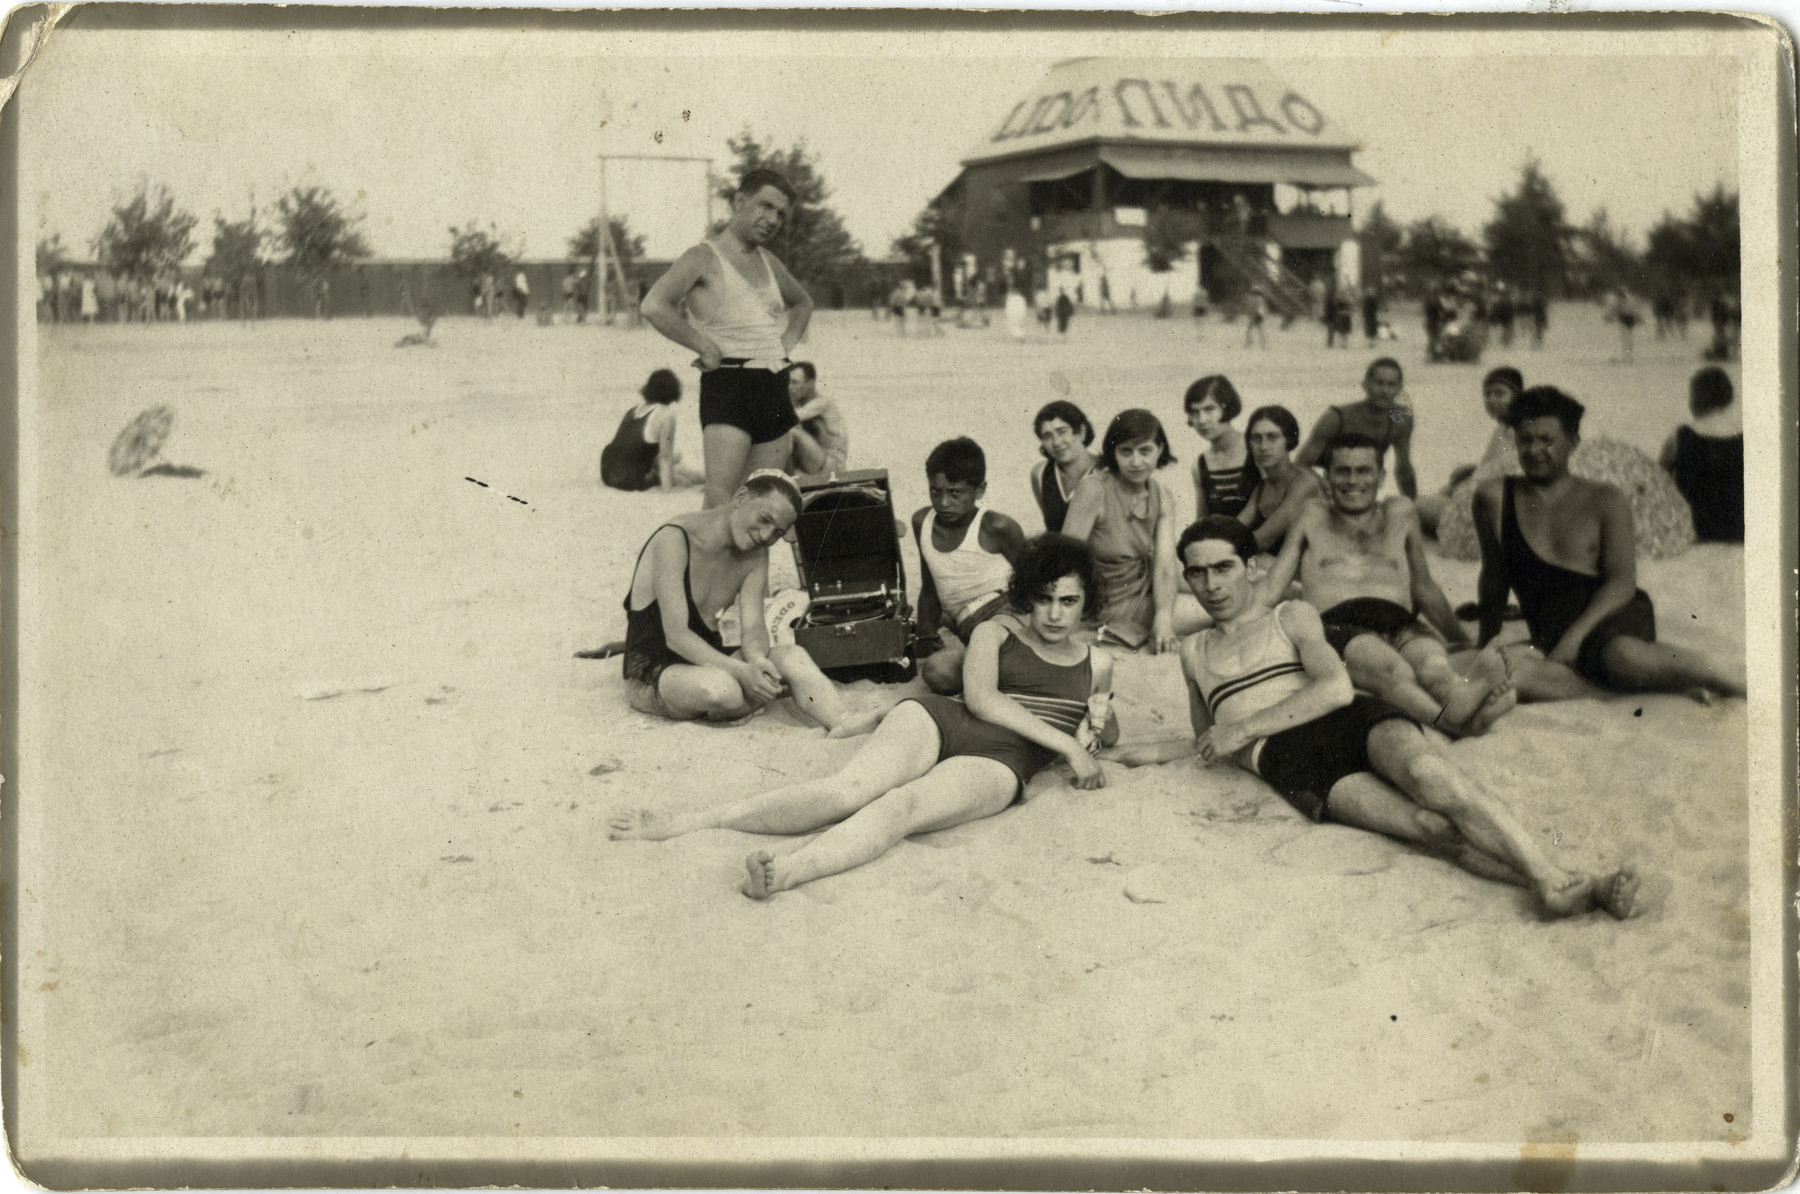 A group of Yugoslavs relax on a beach in Belgrade.

Yitzhak (Izak) Manojlvic (first row on the right) on the beach with future wife Hilda Gerstel (first row on the left) in front of Lido, Belgrade.